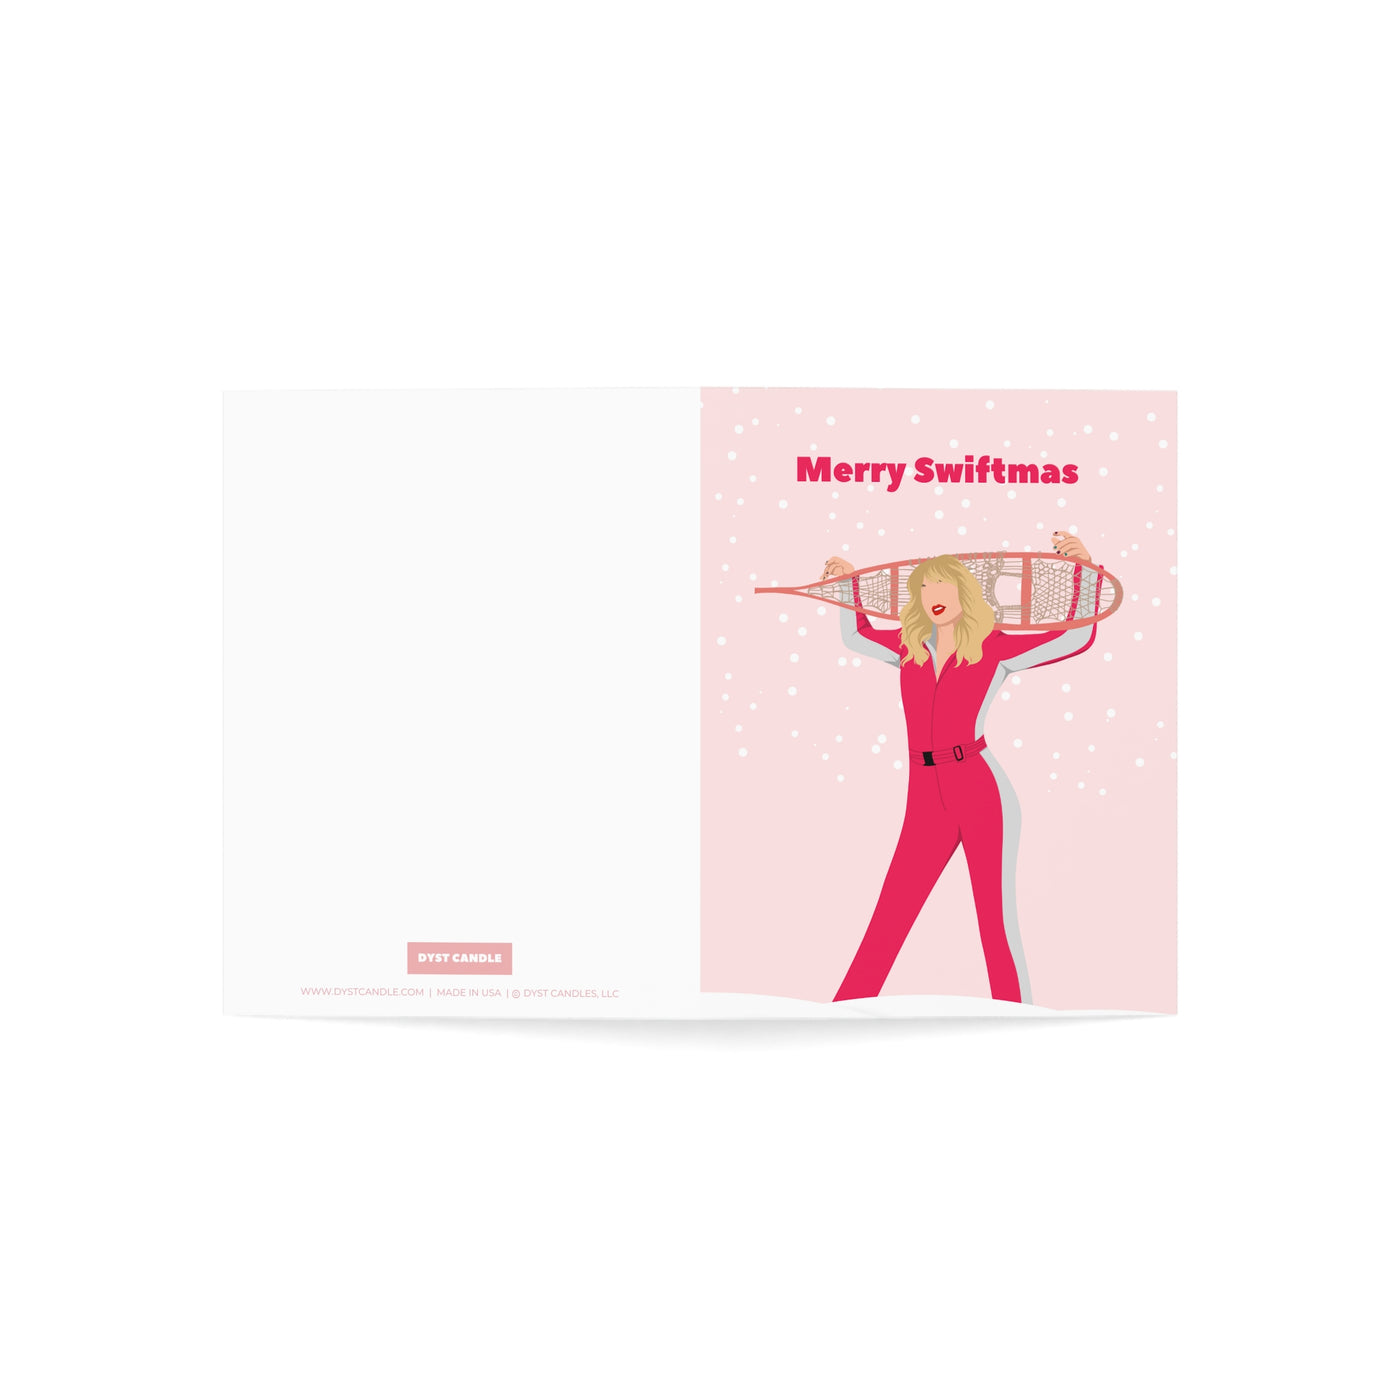 The Taylor - Merry Swiftmas Holiday Greeting Card